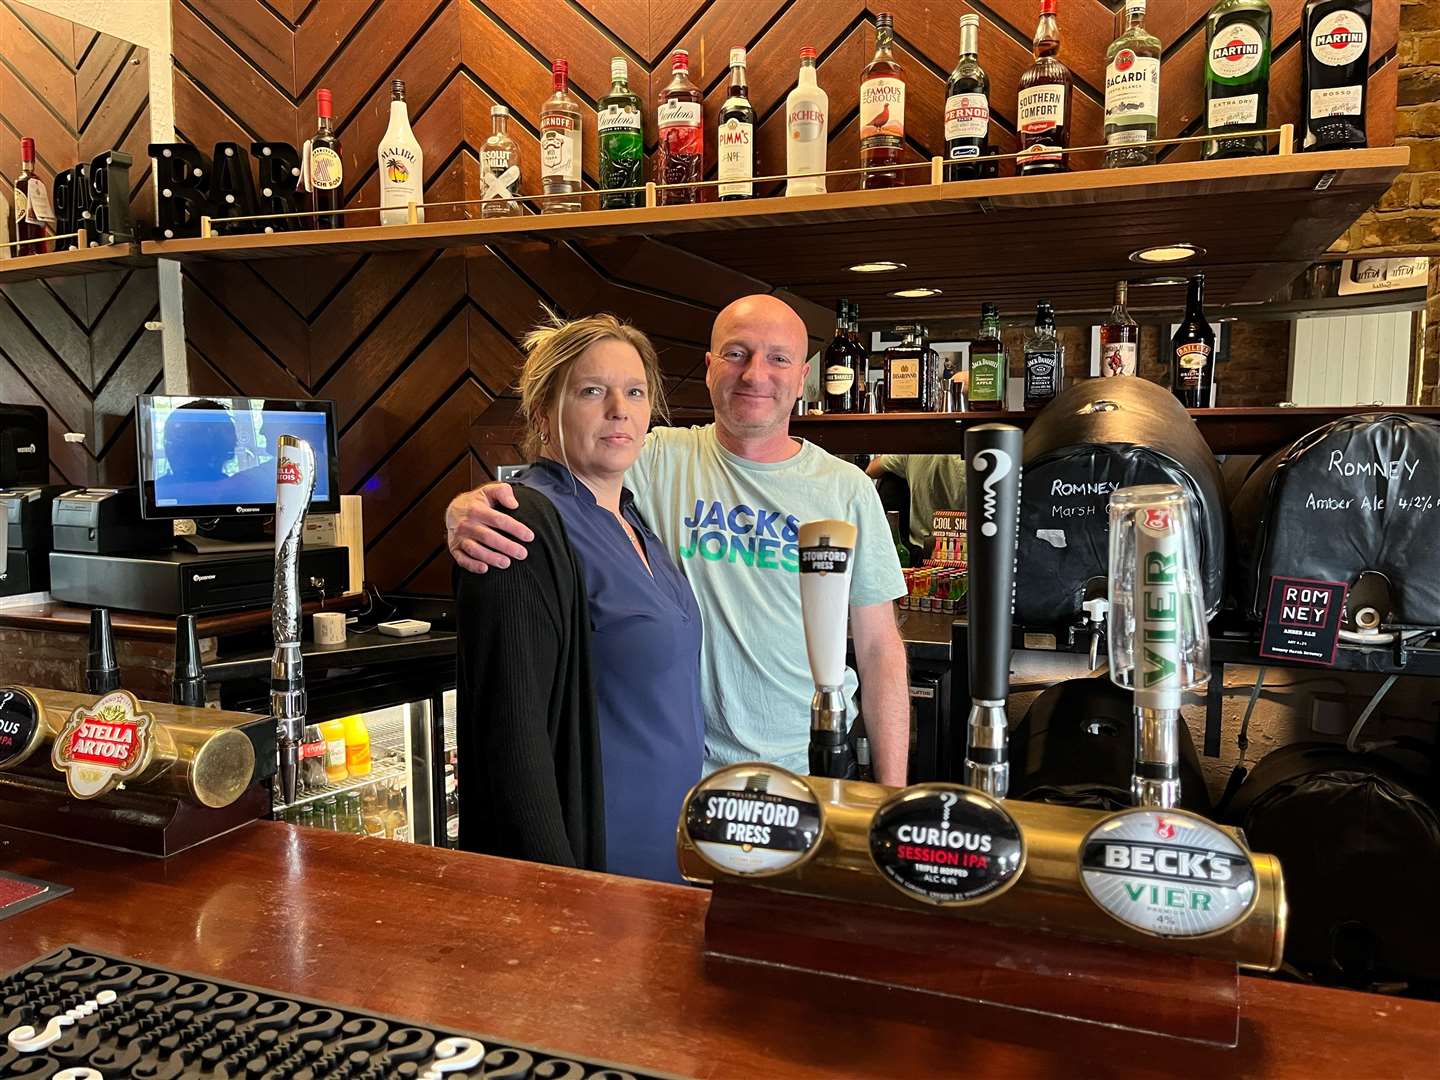 Steve McHugh and Paula Gilbert, new owners of The Chequers pub in Petham, near Canterbury